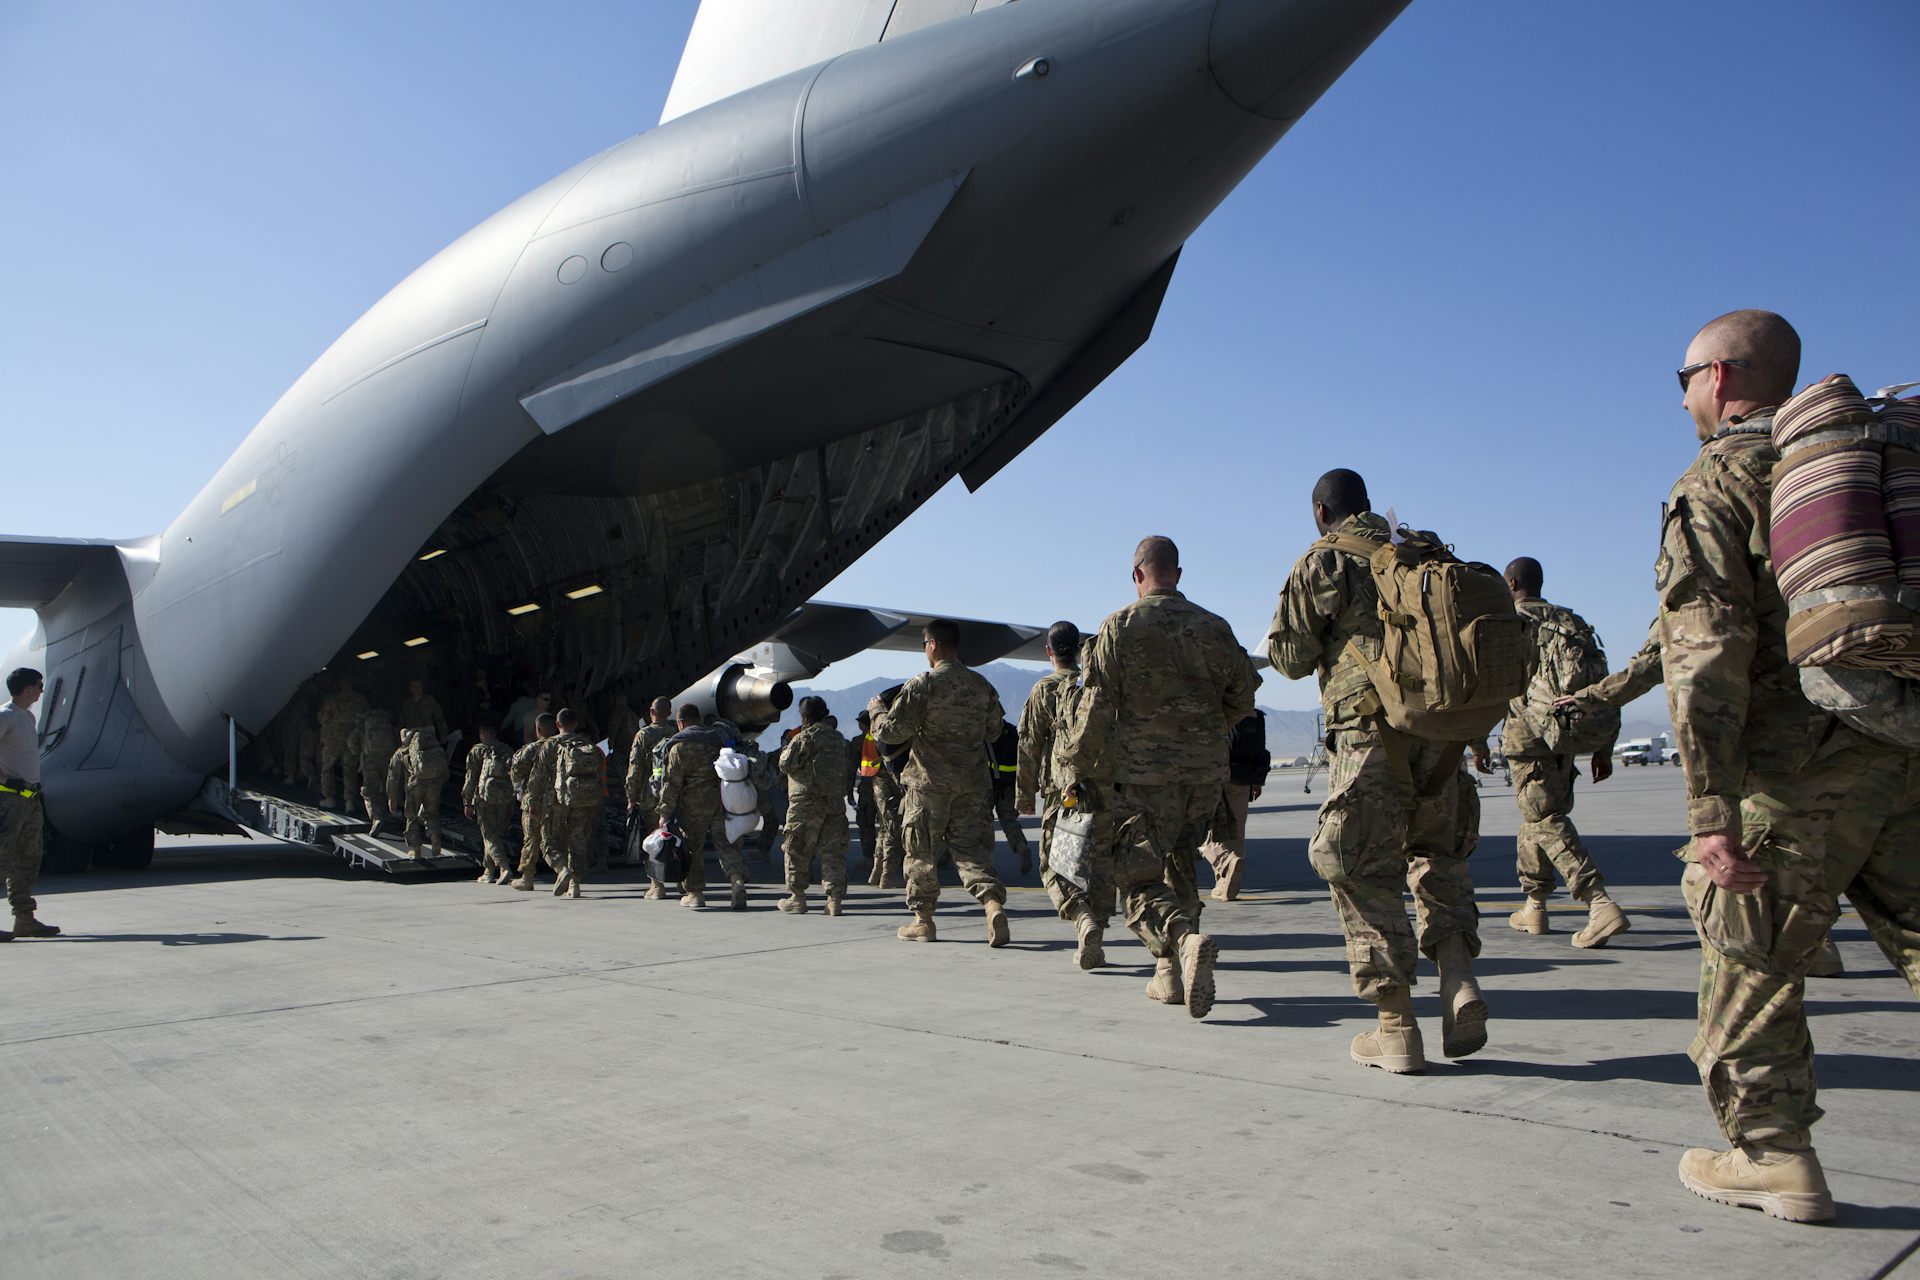 After Afghanistan, U.S. Military Presence Abroad Faces Domestic and Foreign Opposition in 2022